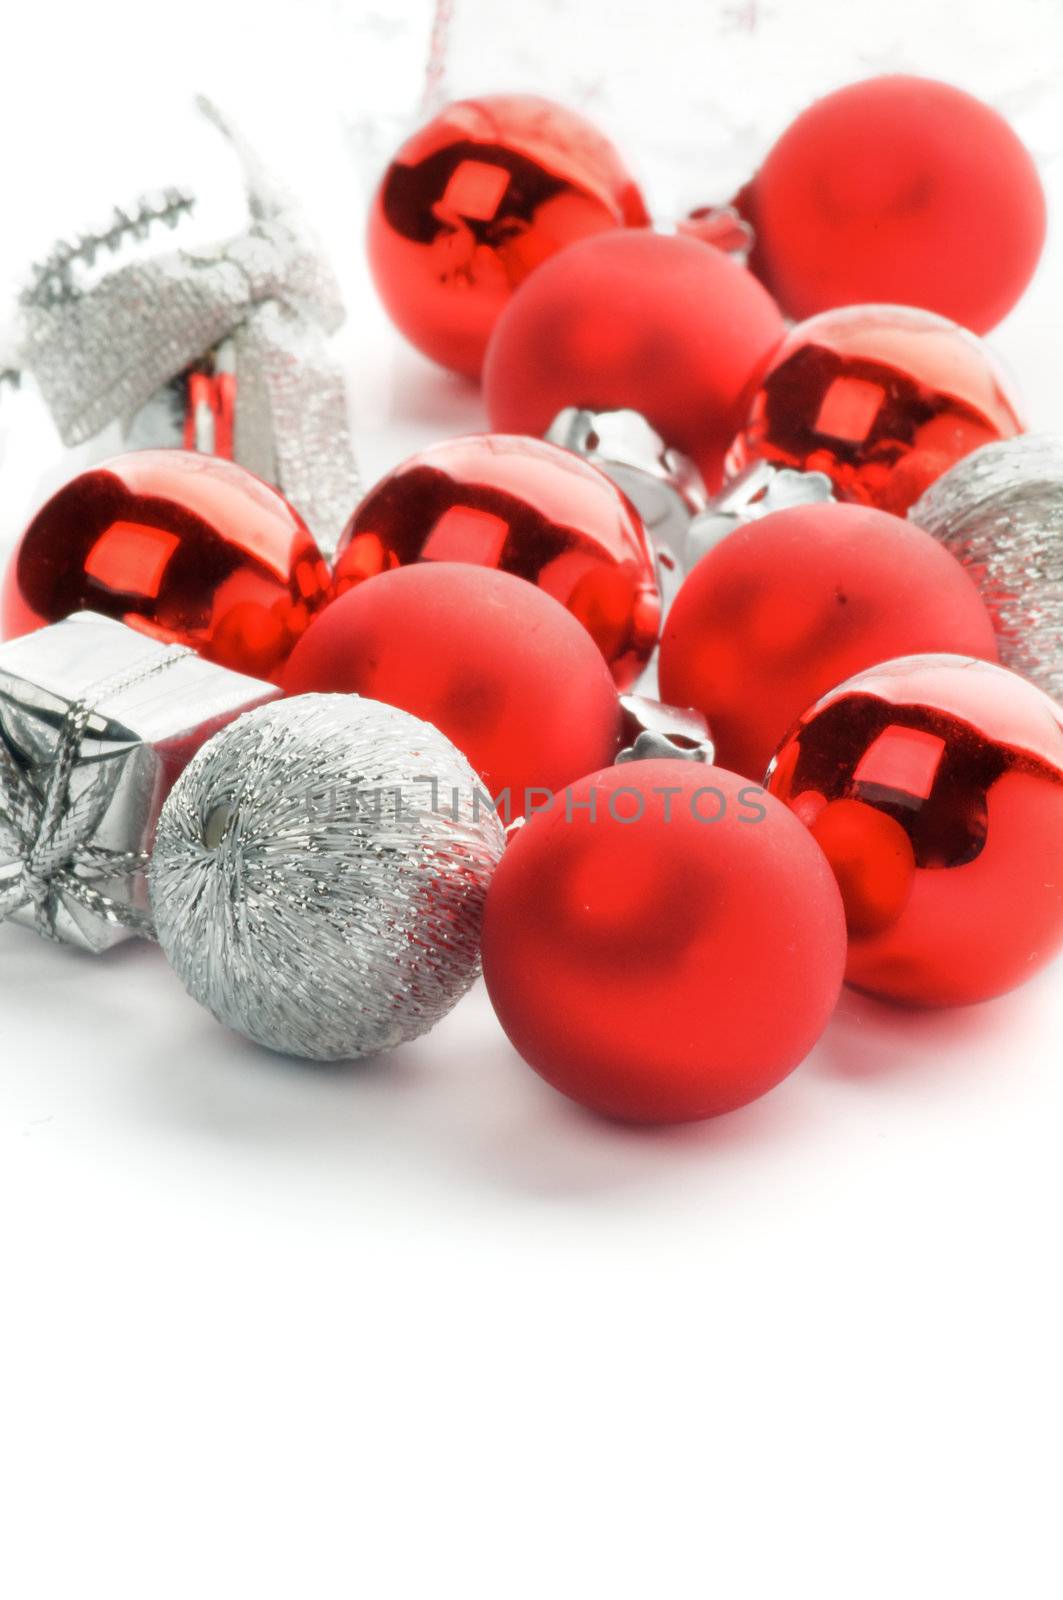 Christmas Baubles by zhekos